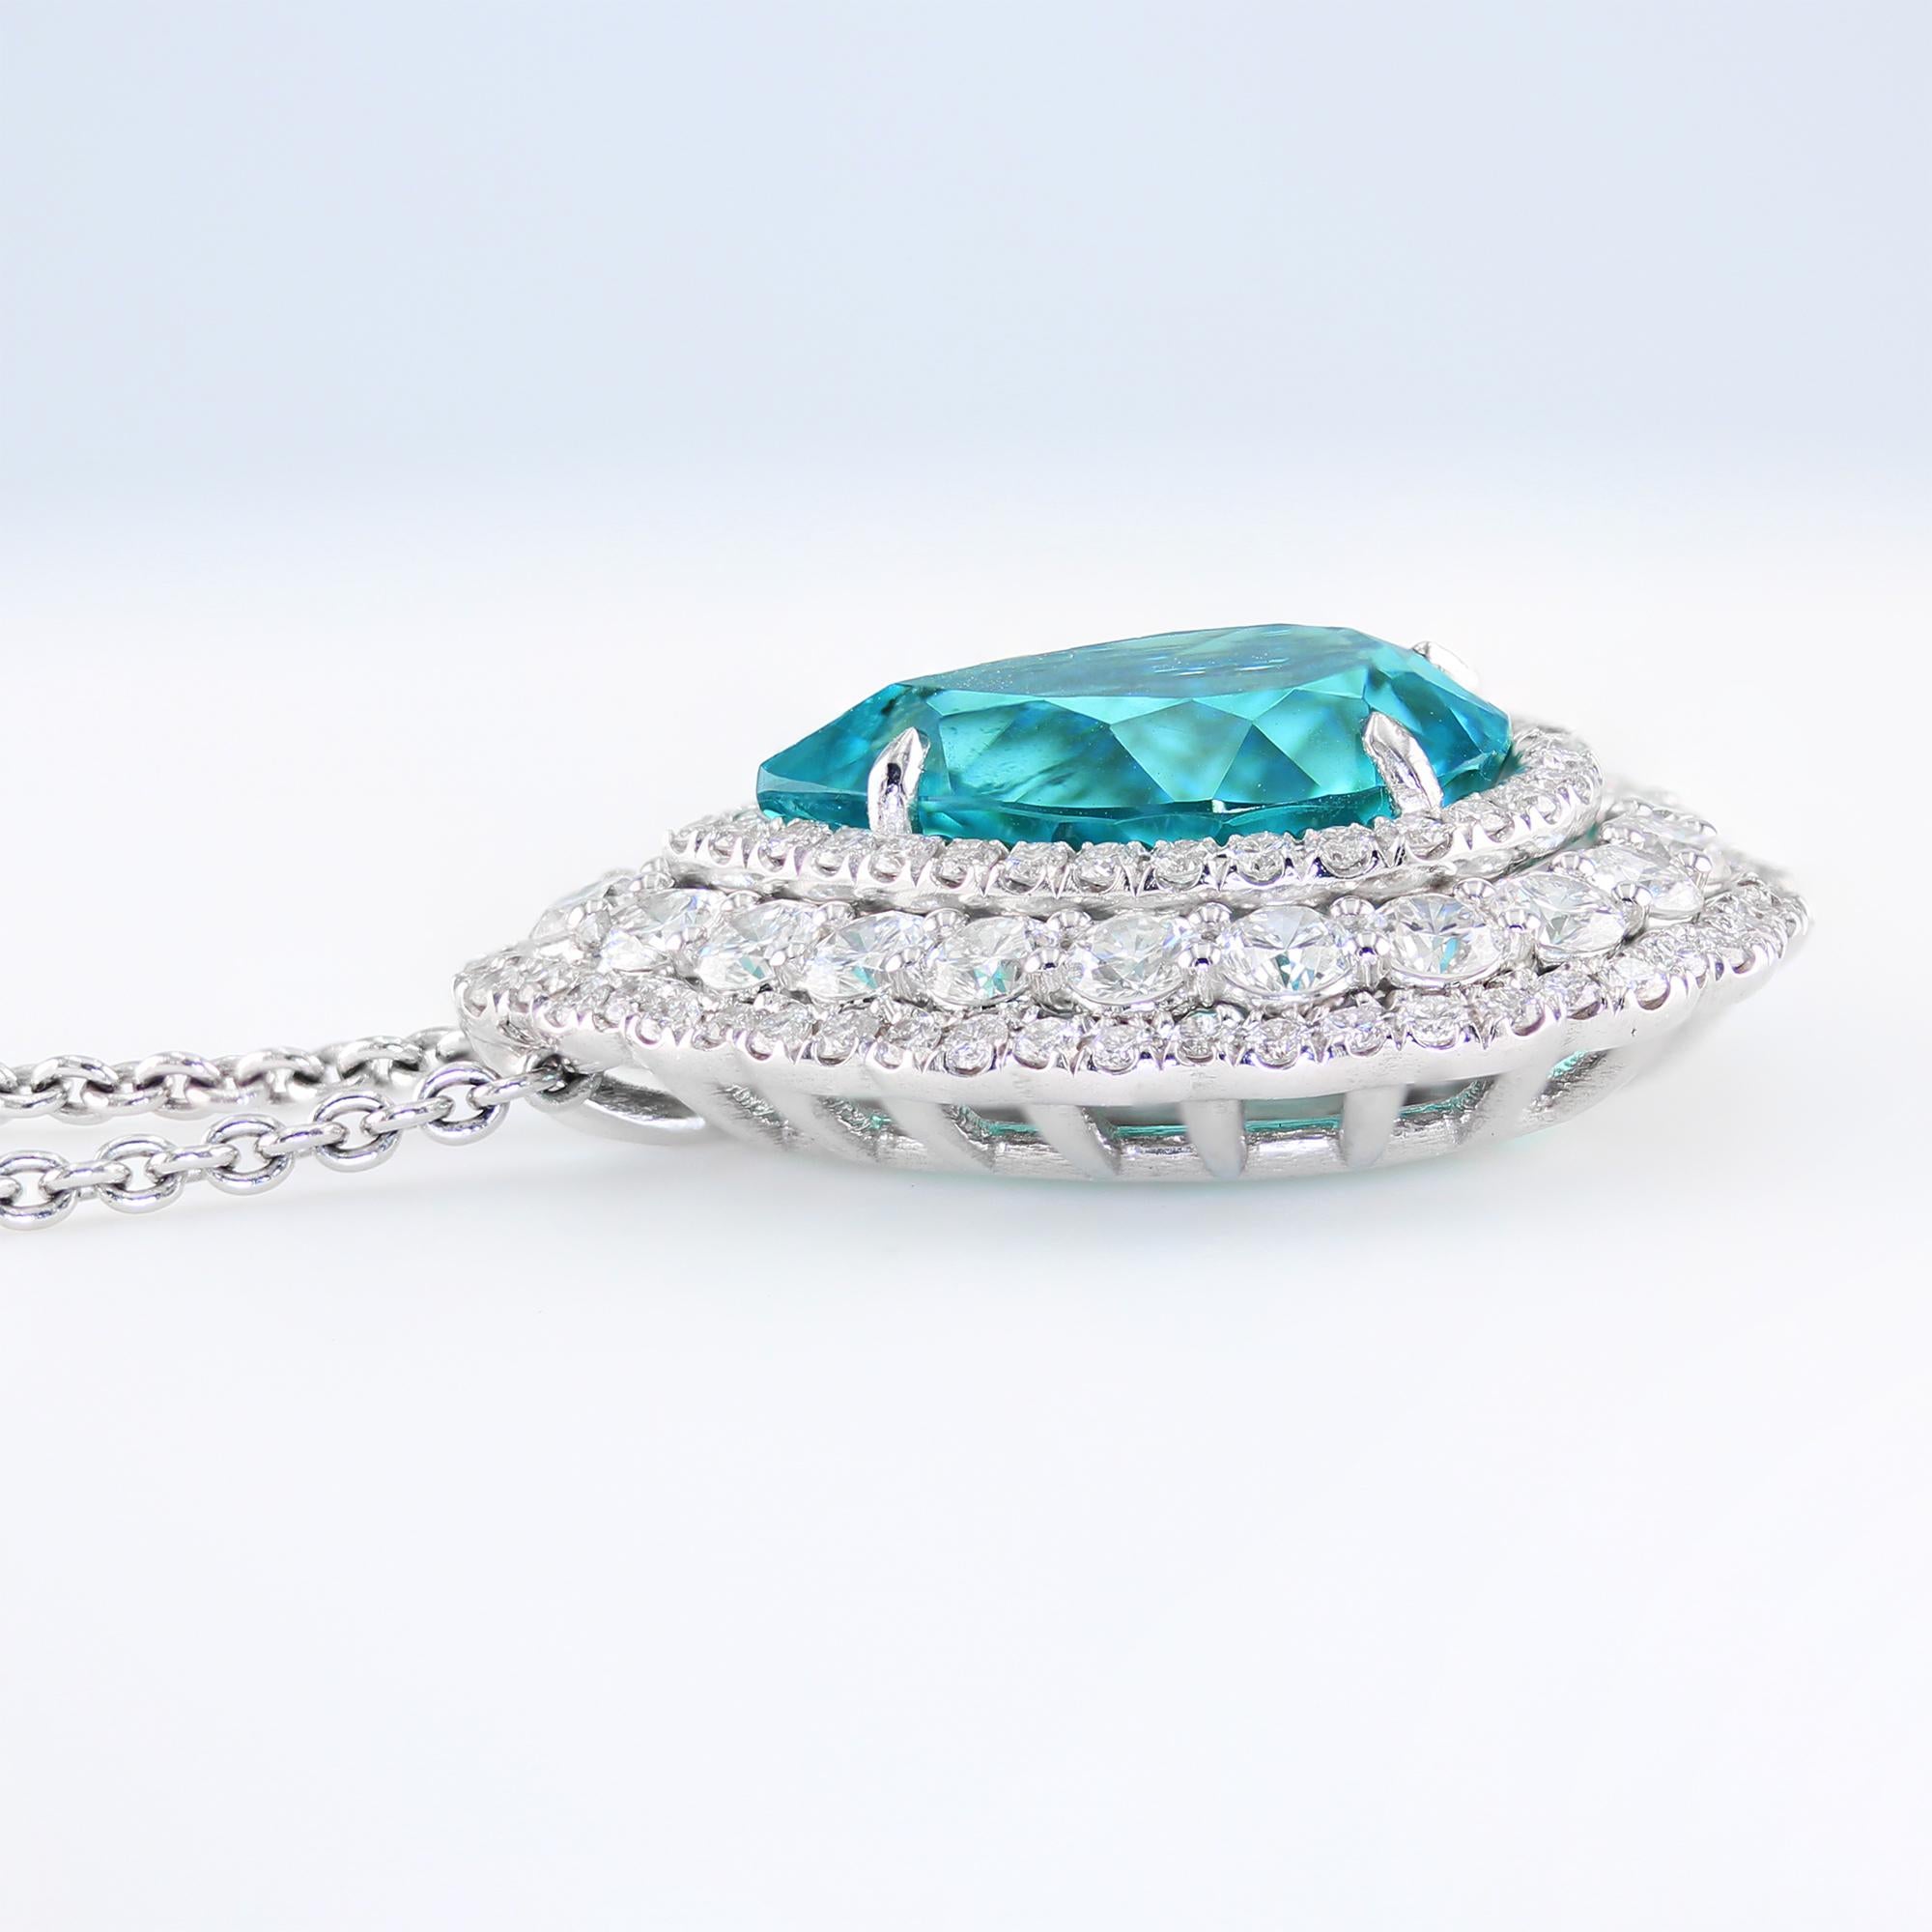 5.86 carat pear-shape Brazilian Paraiba Tourmaline, surrounded by 1.95 carat diamond halo. 

The vibrant and extraordinary color of this one-of-a-kind Brazilian Paraiba makes one feel unique, classy and special while wearing it. It is the perfect